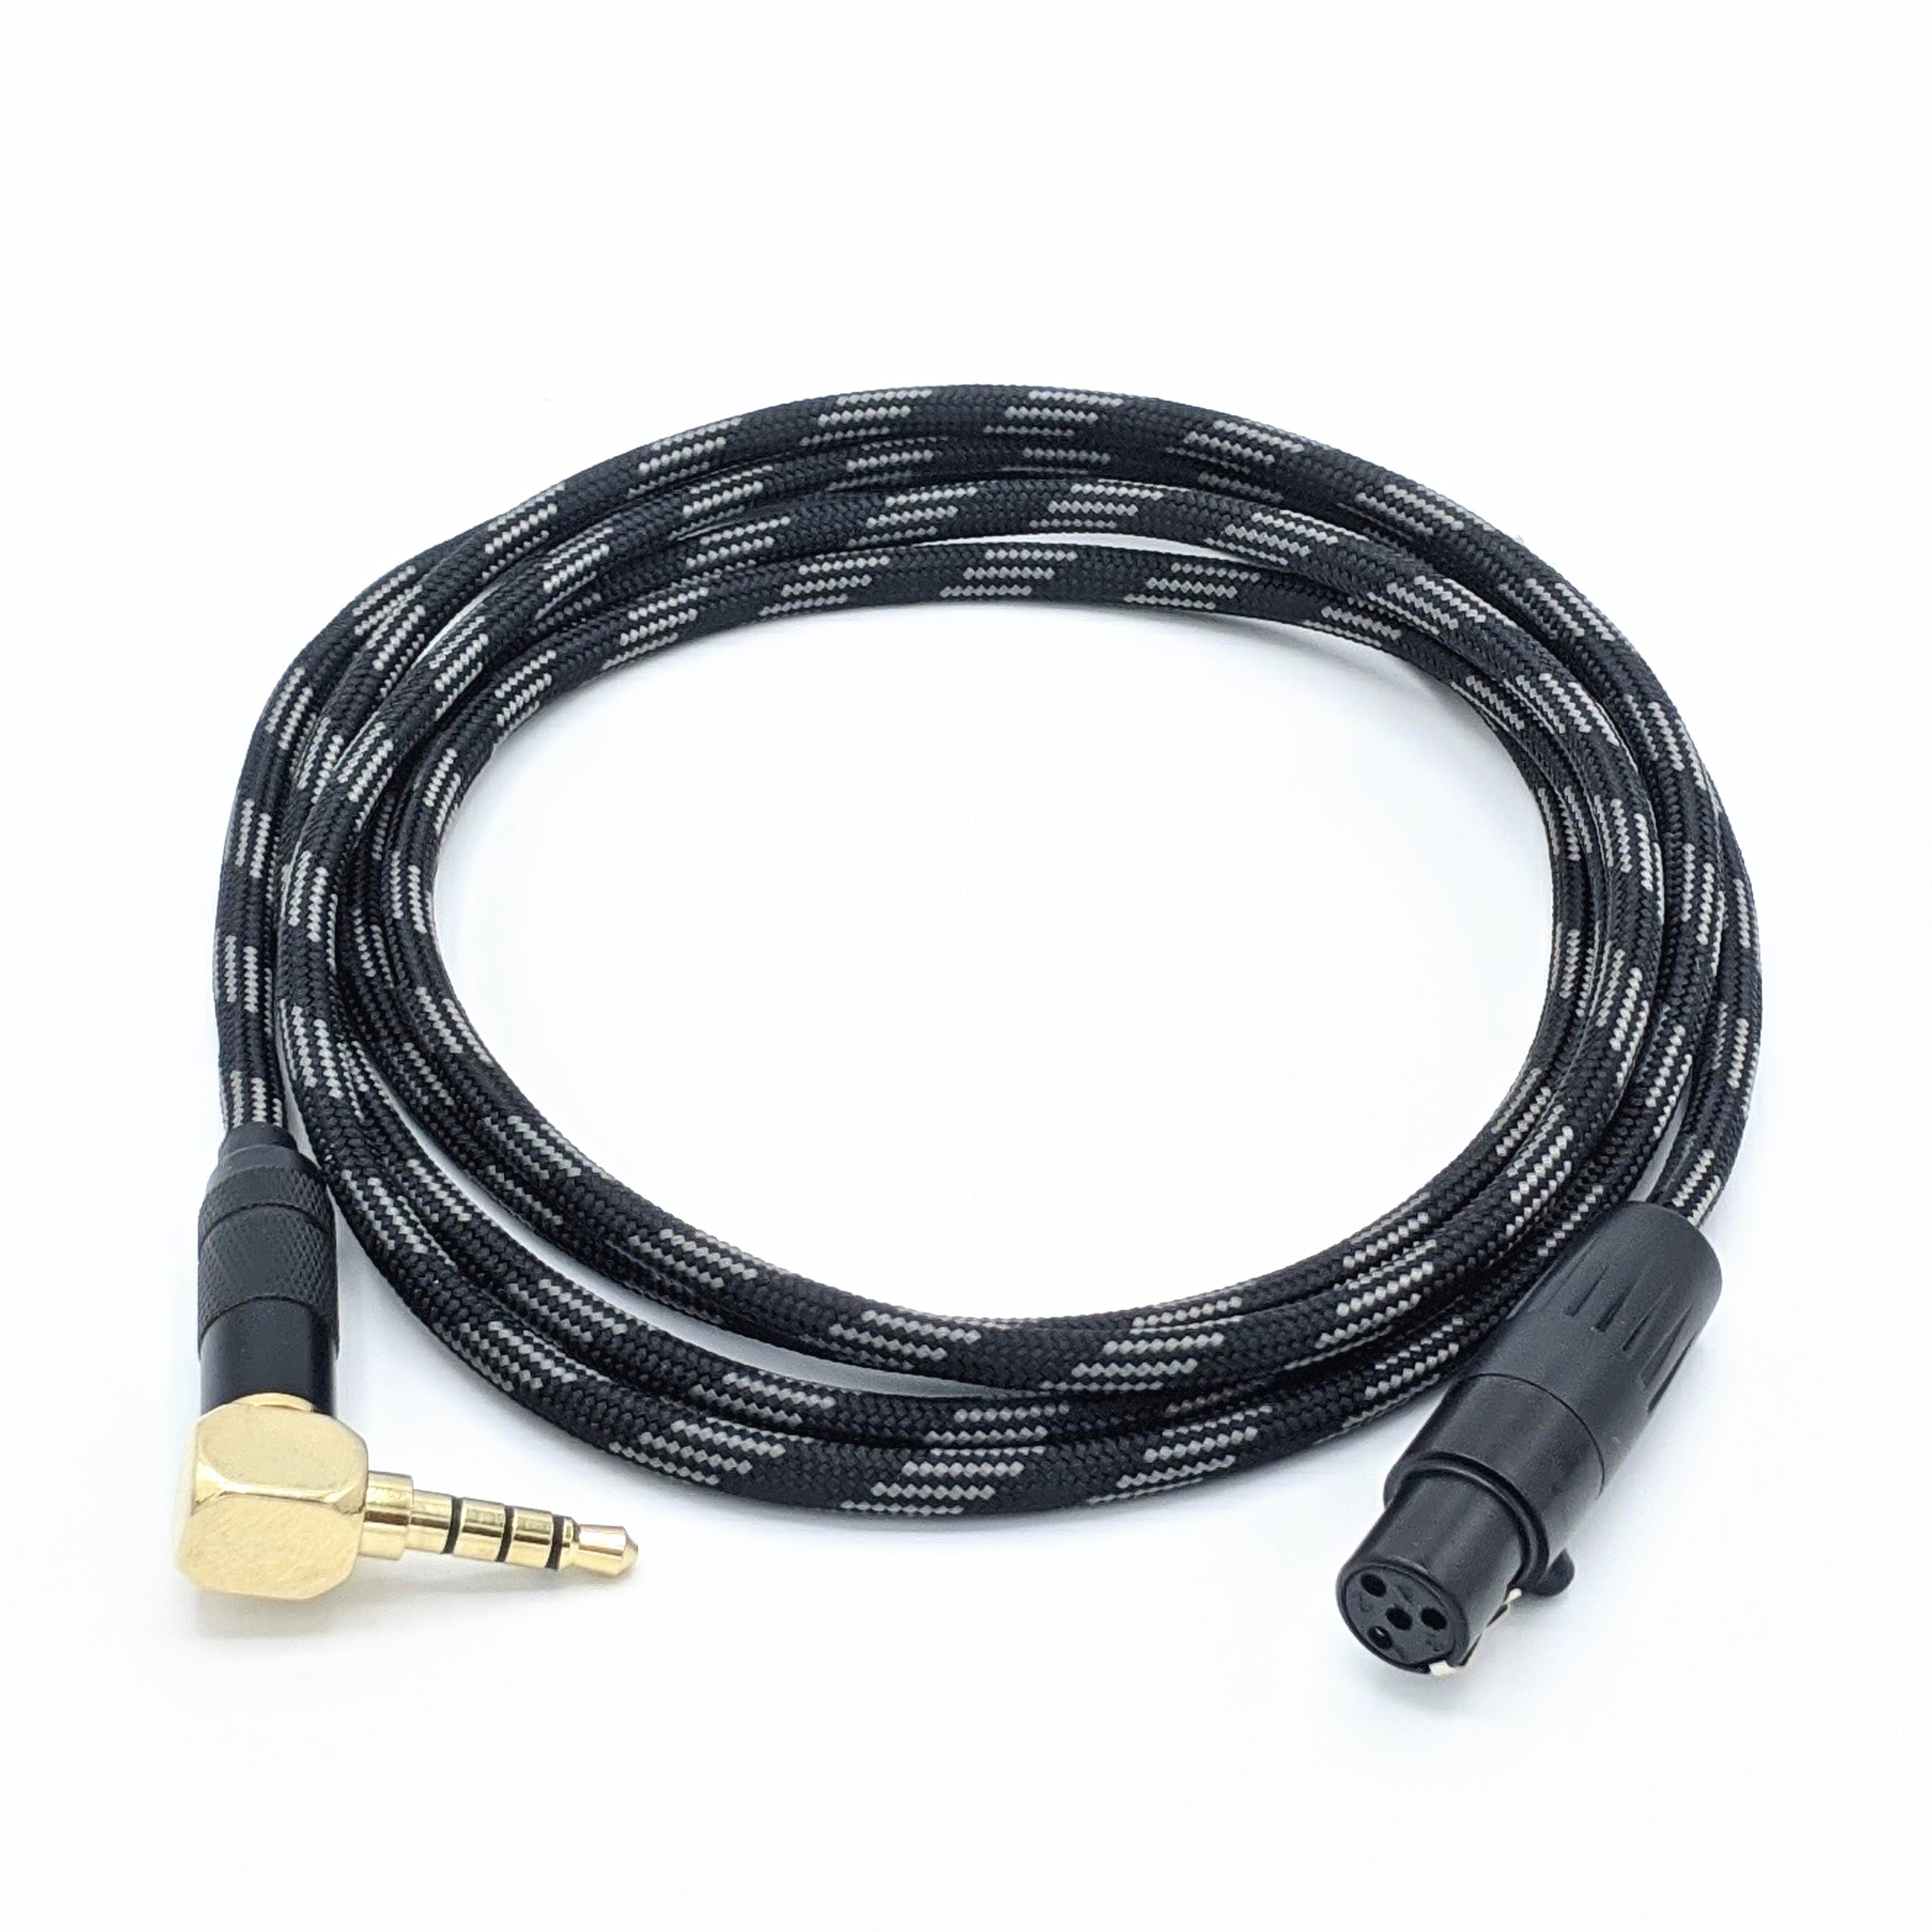 Hc 3 B 90 3 5mm Trrs Balanced Headphone Cable Hart Audio Cables